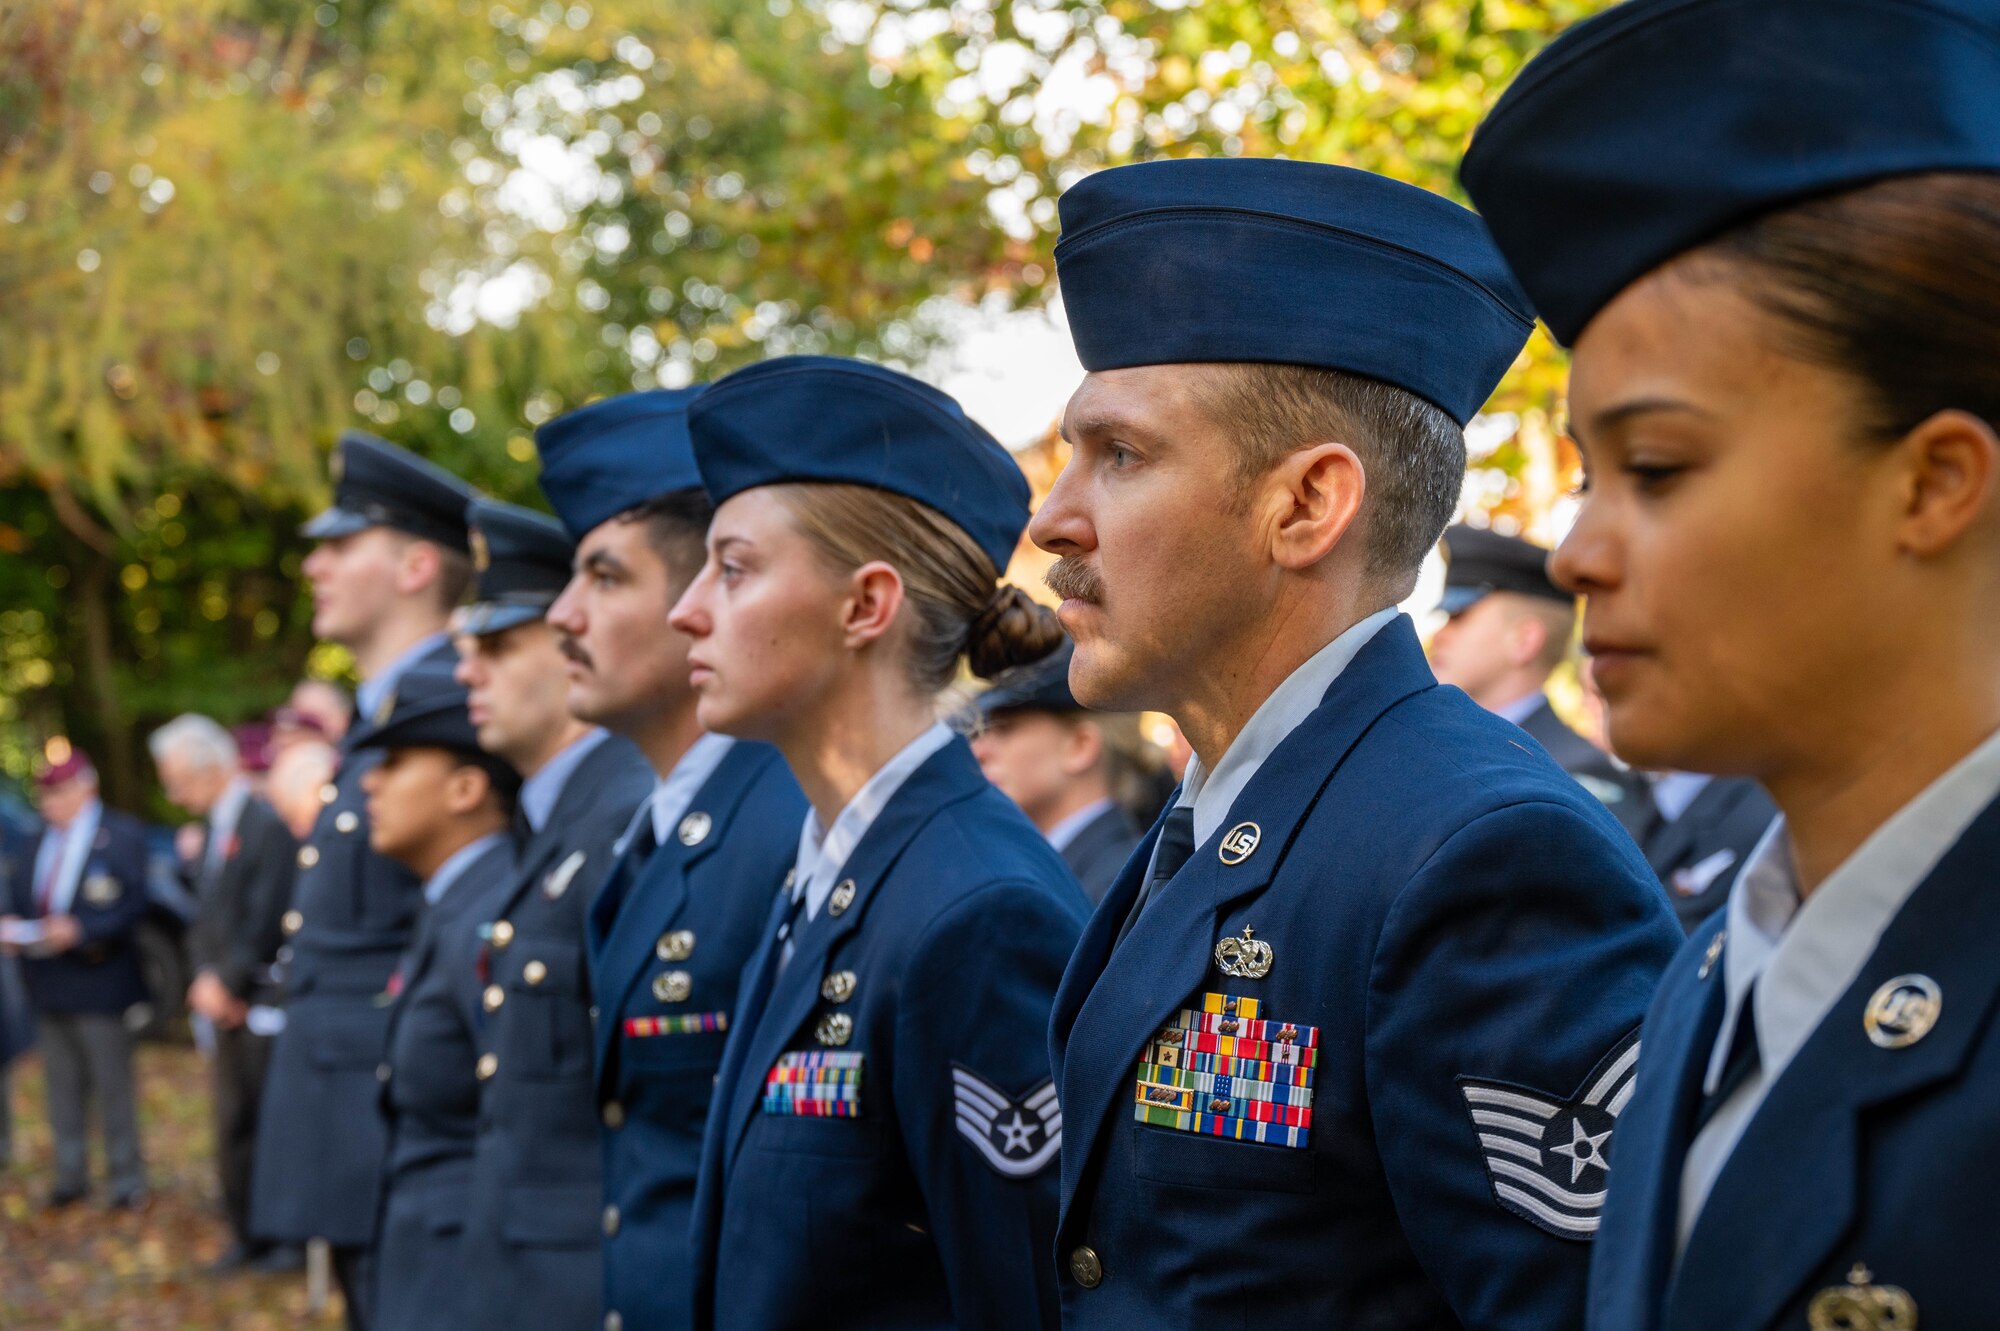 Airmen stand at attention during a Remembrance Day ceremony.